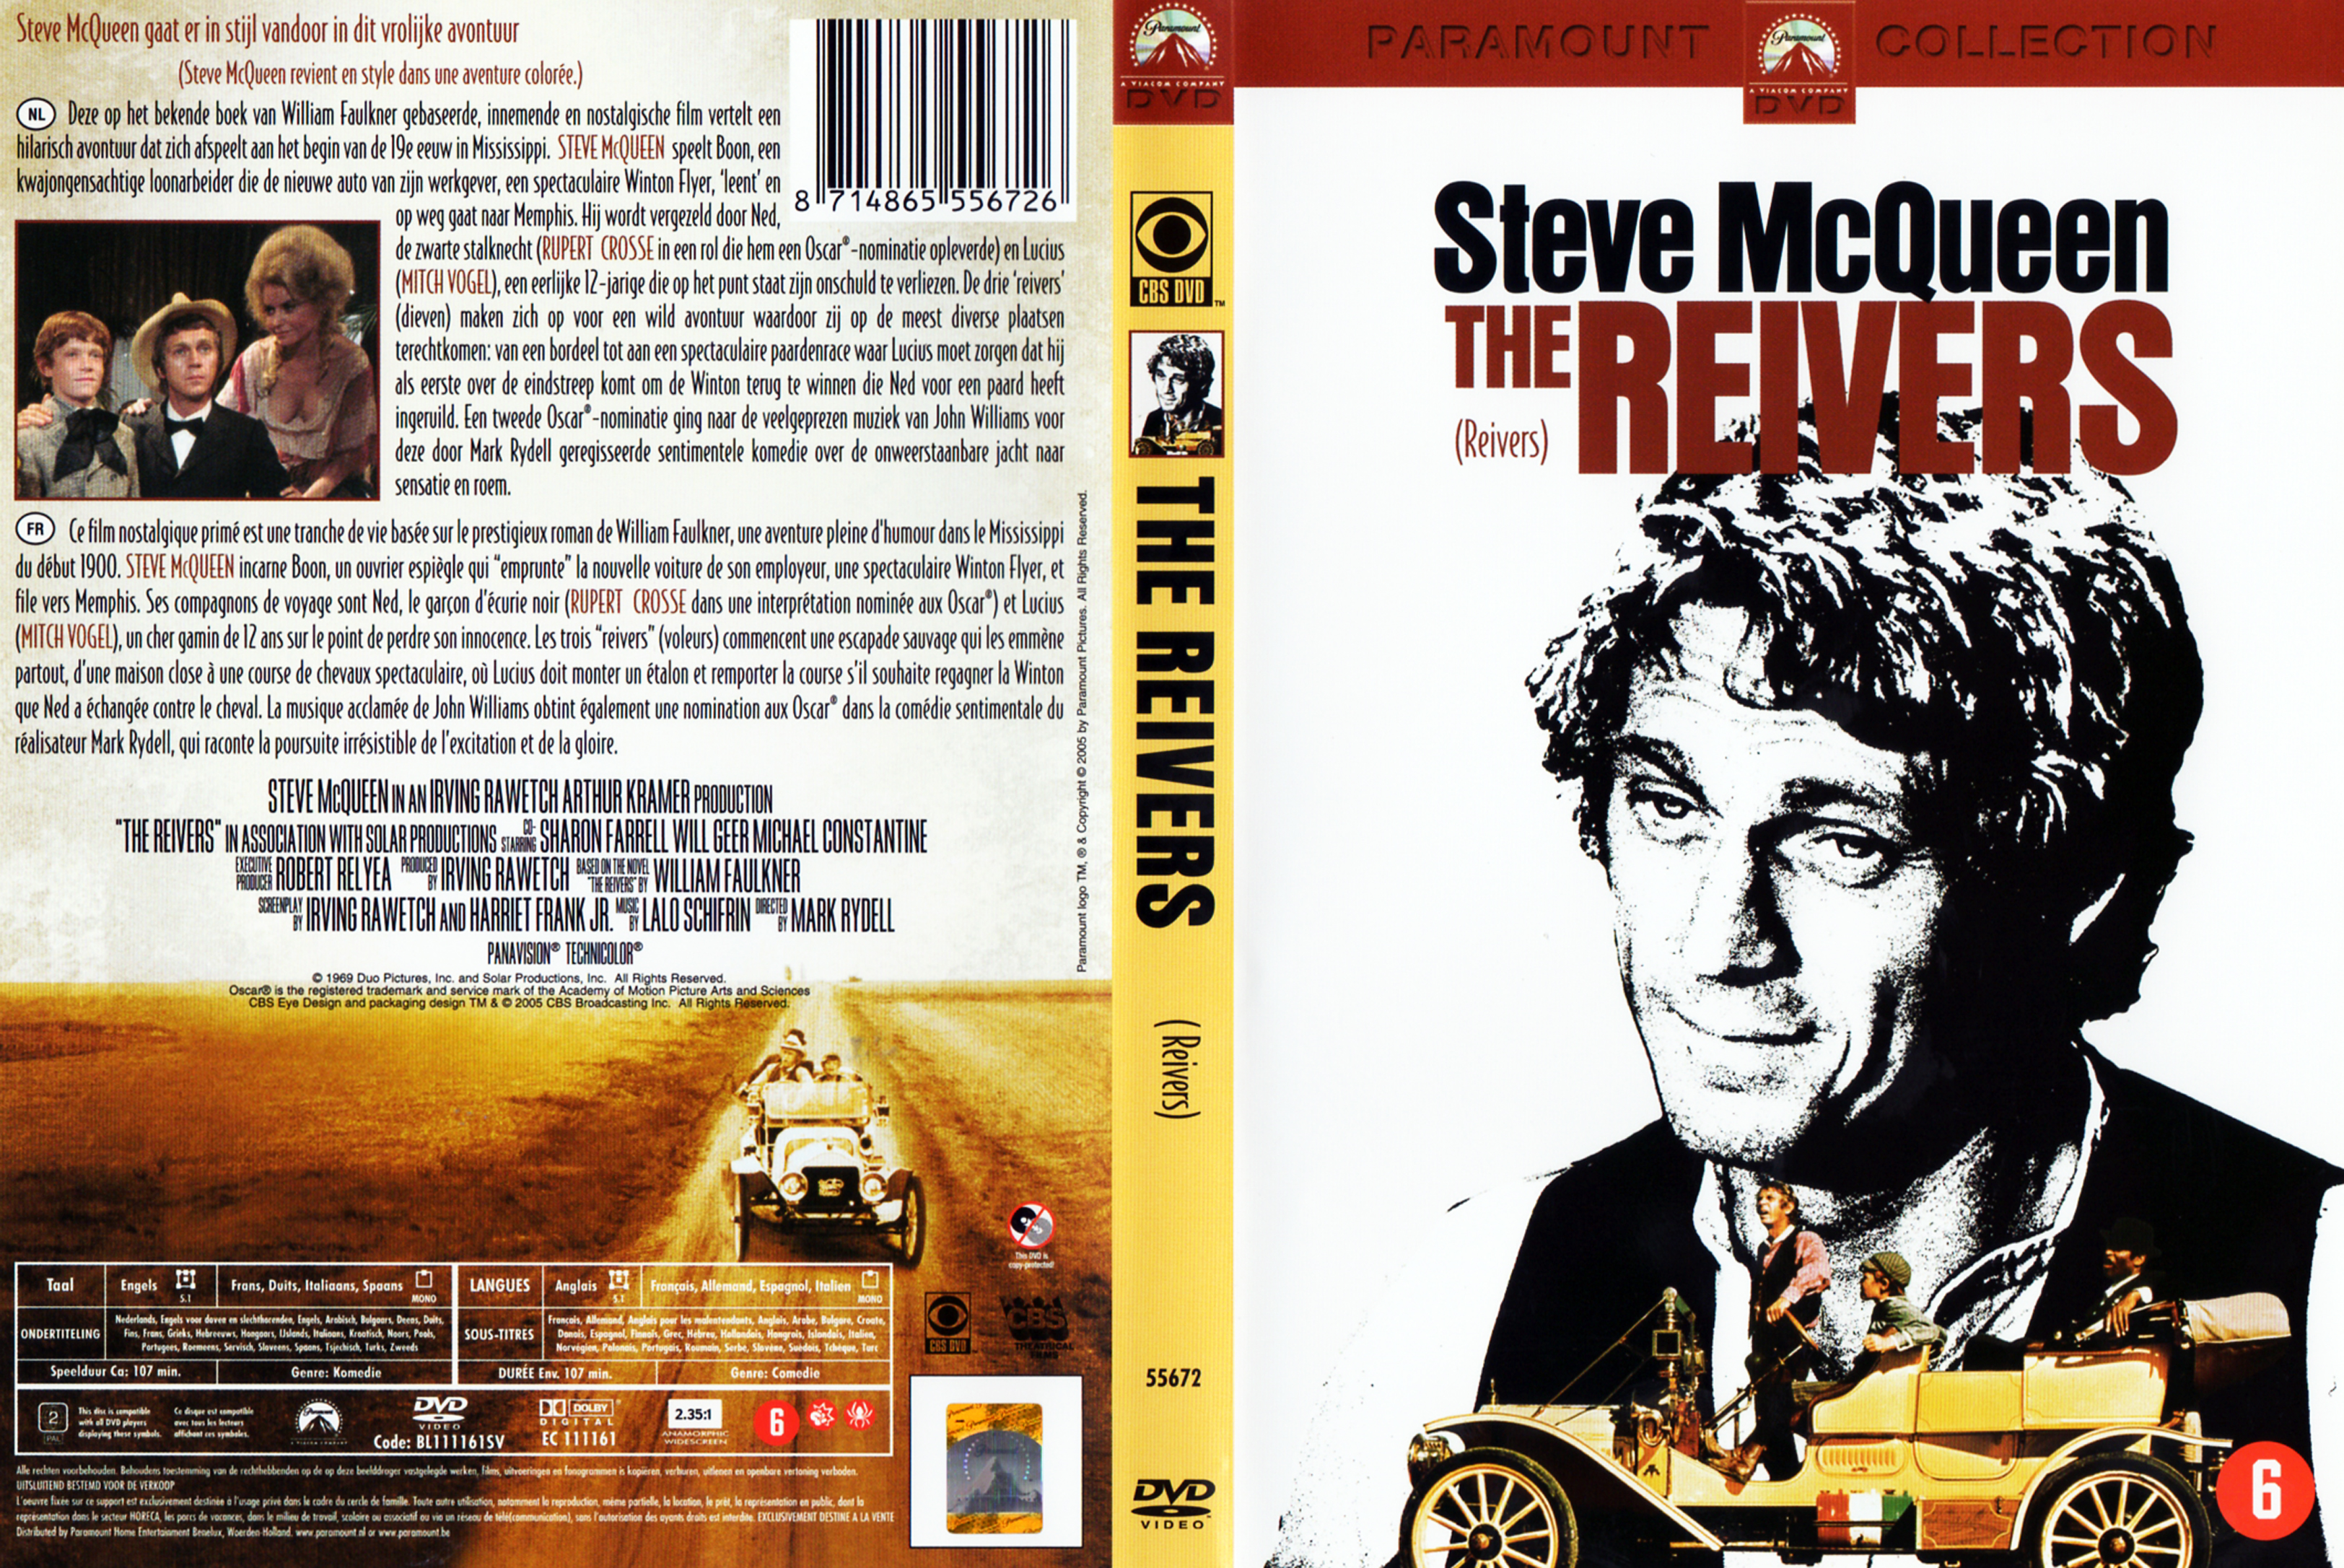 Jaquette DVD The reivers